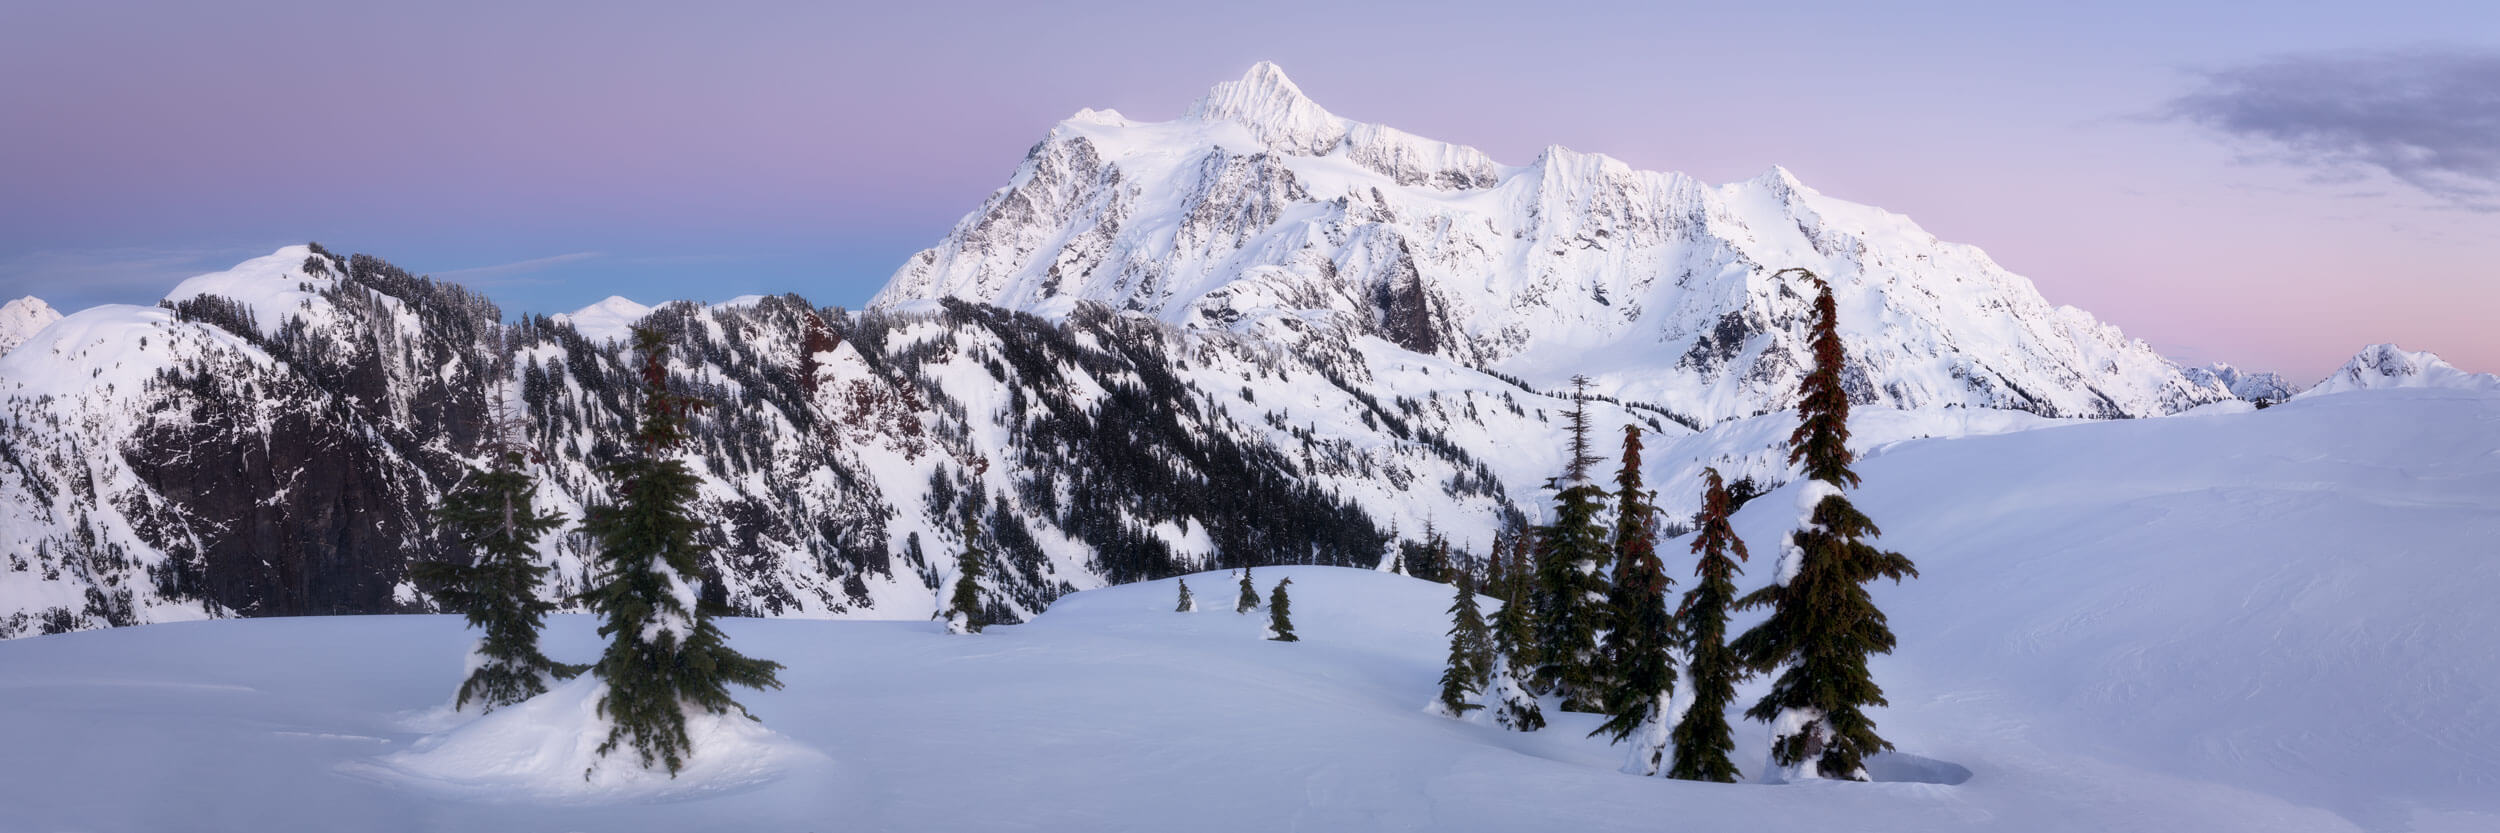 An Artist Point snowshoe picture shows Mount Shuksan at sunset.